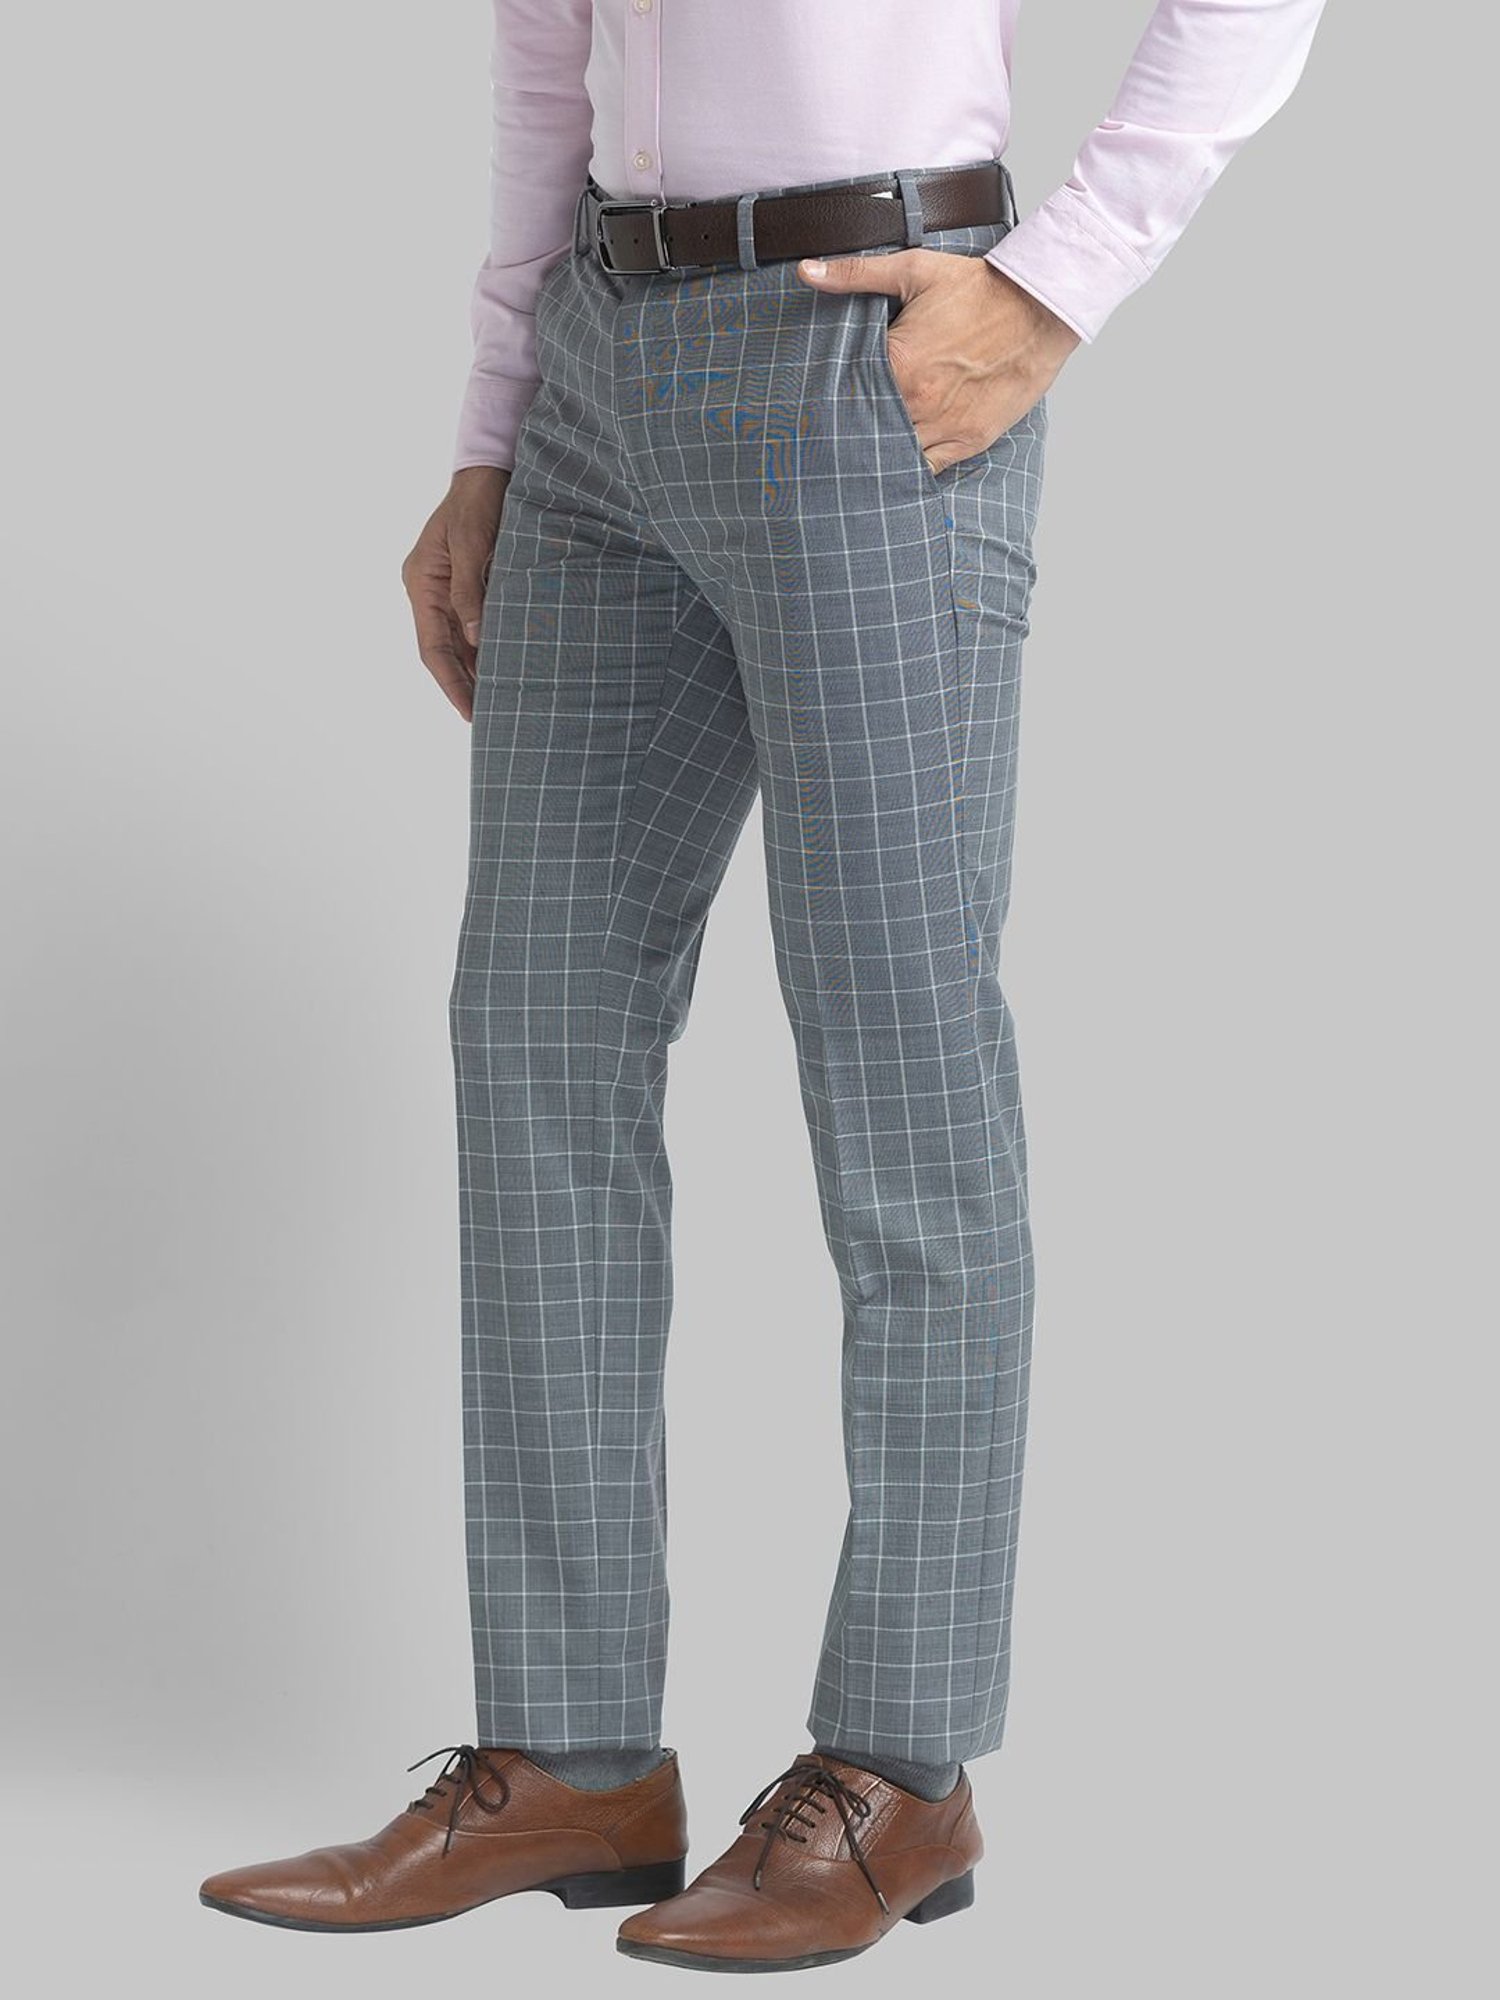 Plaid Striped Mens Slim Fit Pants For Office, Formal, And Business Casual  Wear Fashionable Straight Long Streetwear Plaid Trousers Men From Cinda02,  $19.26 | DHgate.Com